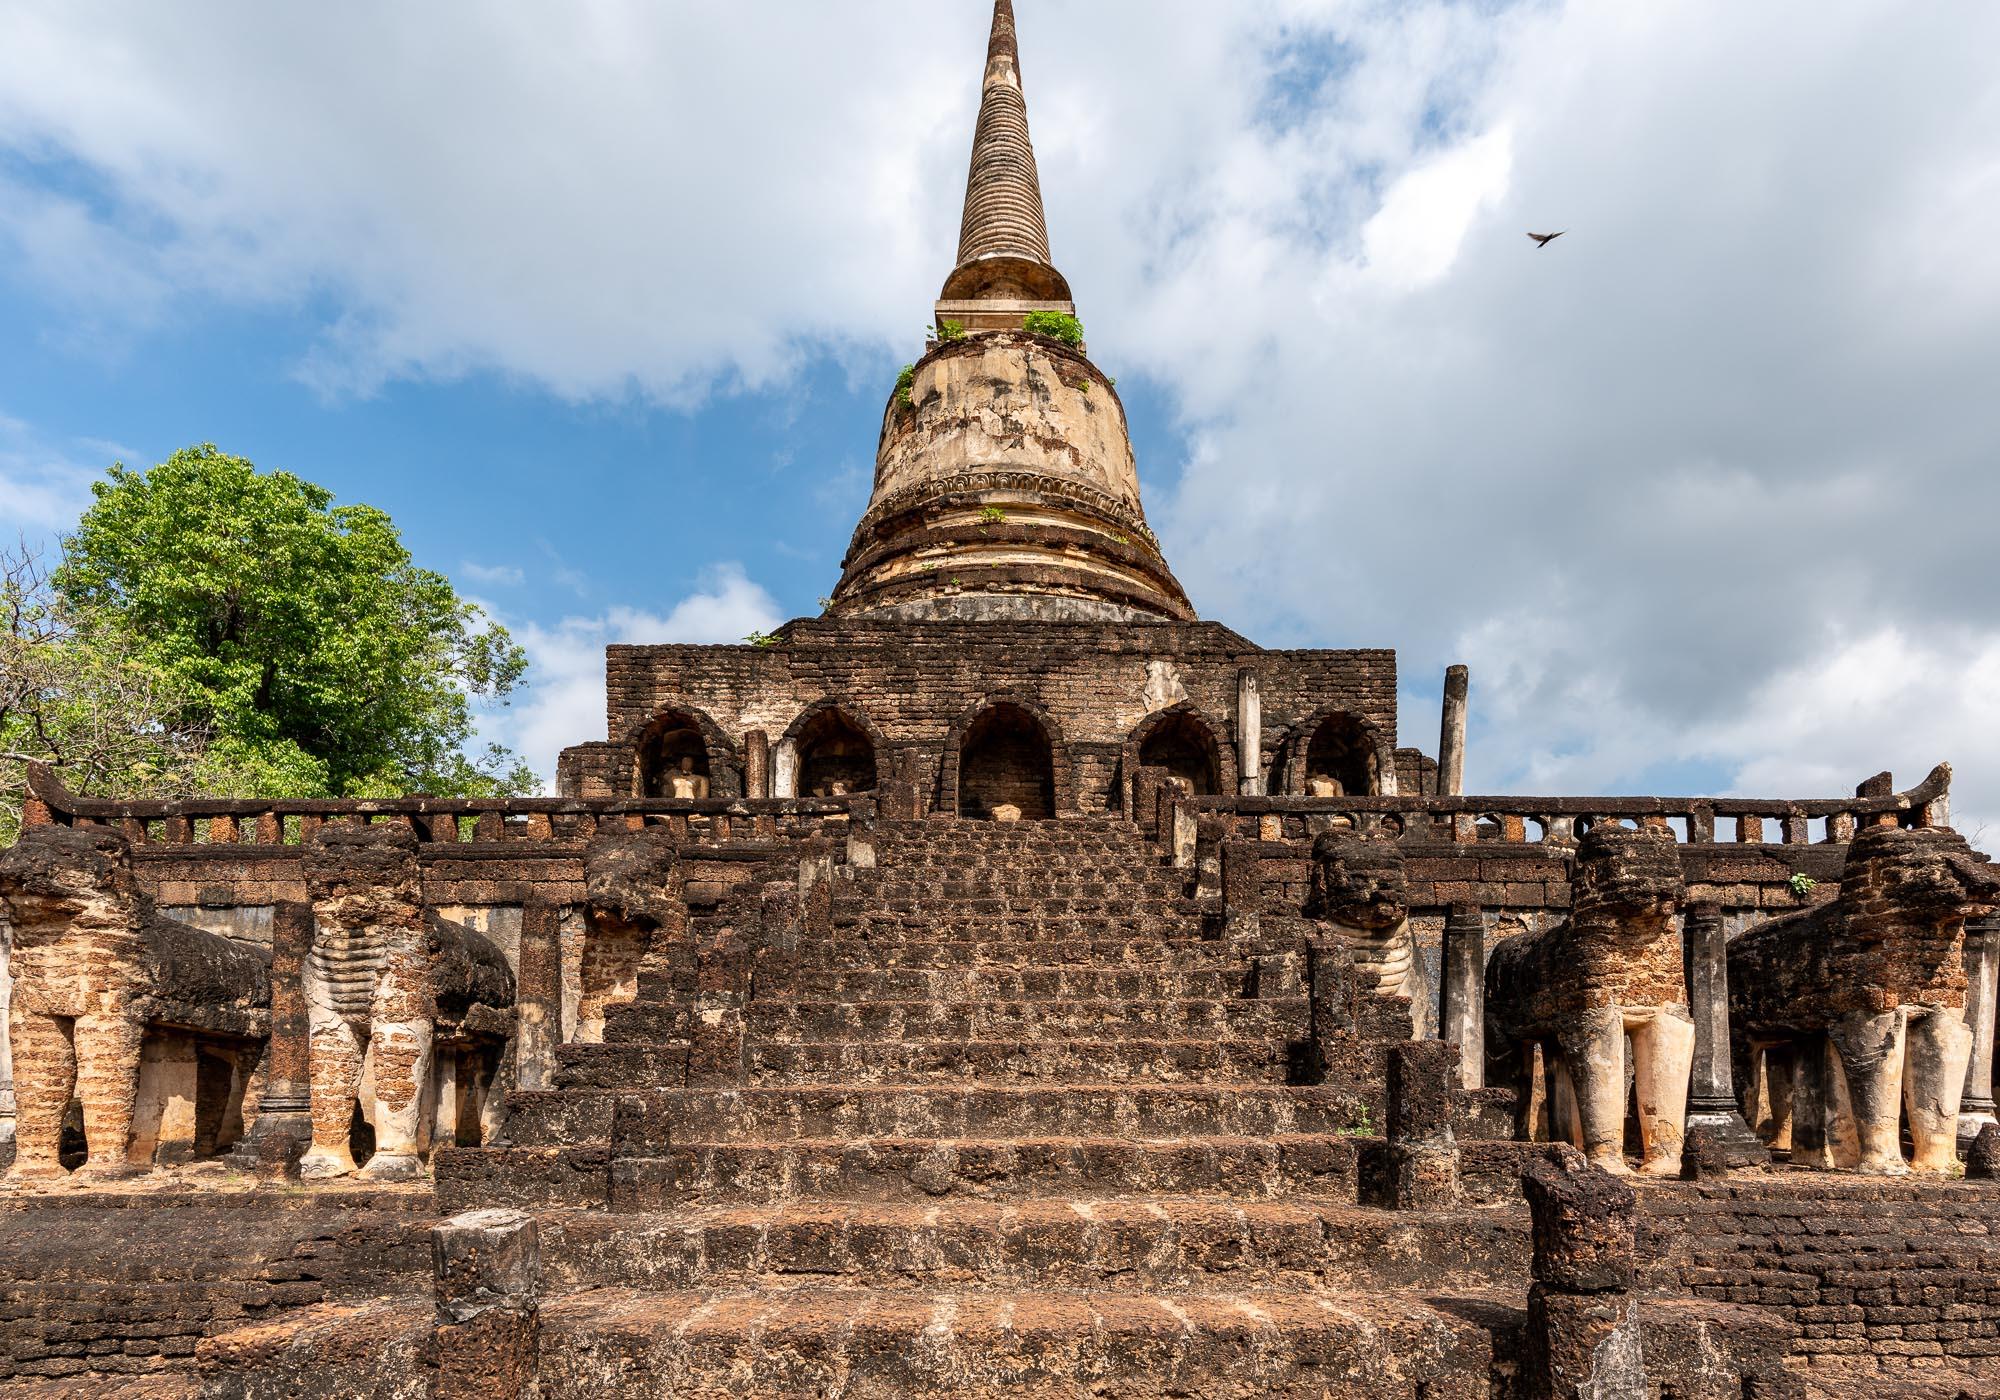 The bell-shaped stupa of Wat Chang Lom was inspired by the Sri Lanka style. – © Michael Turtle